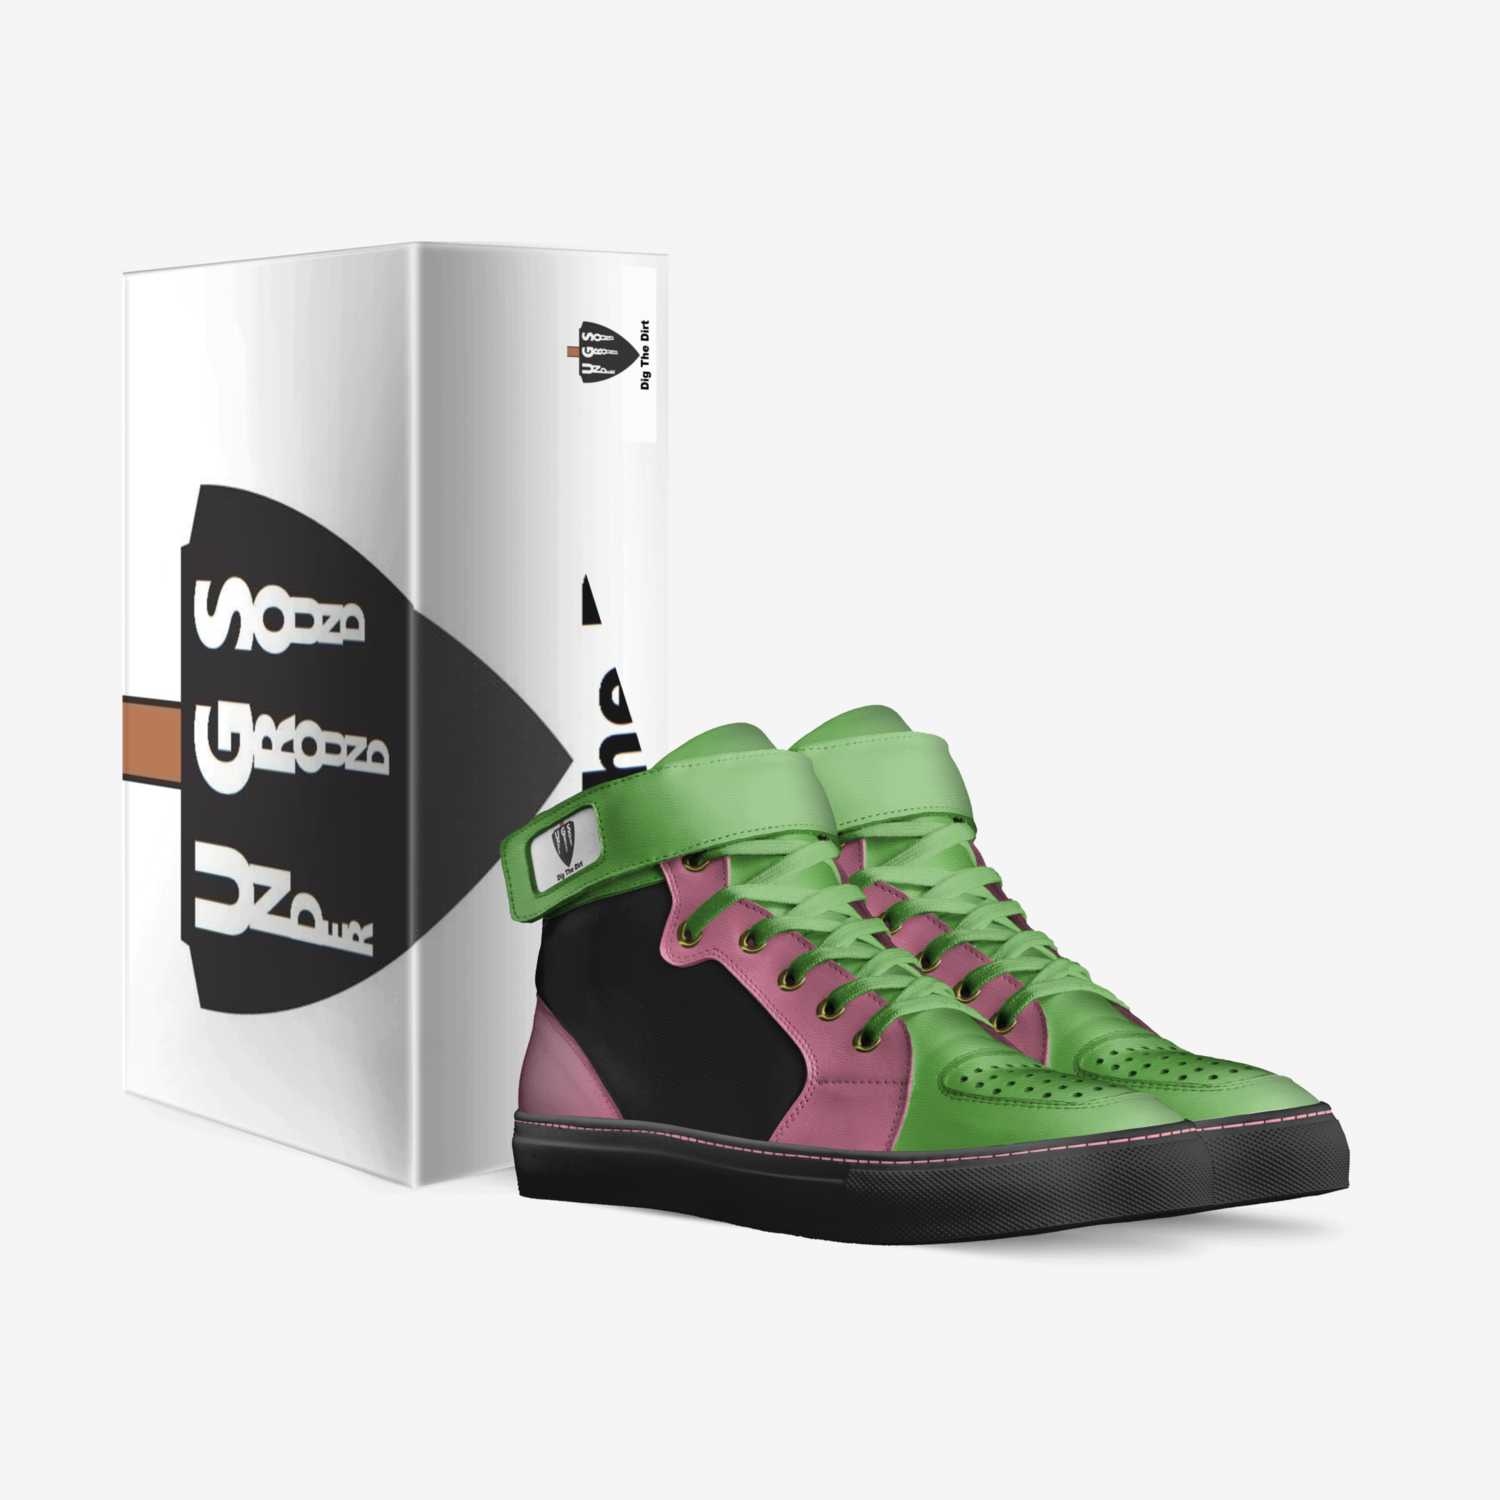 UnderGround Sound custom made in Italy shoes by Brandon Jay Smith | Box view